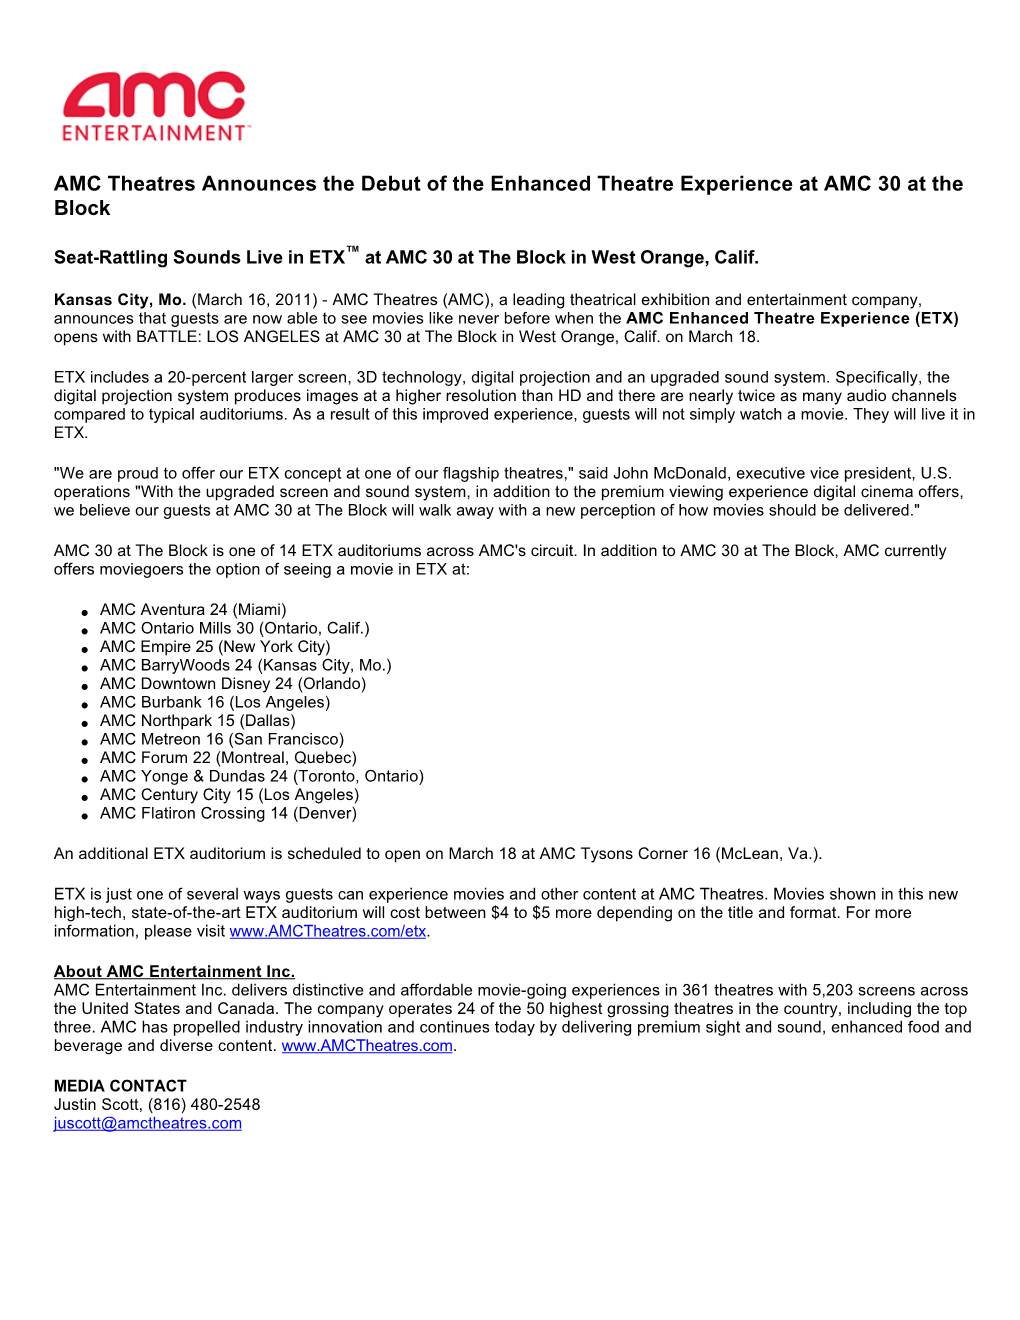 AMC Theatres Announces the Debut of the Enhanced Theatre Experience at AMC 30 at the Block